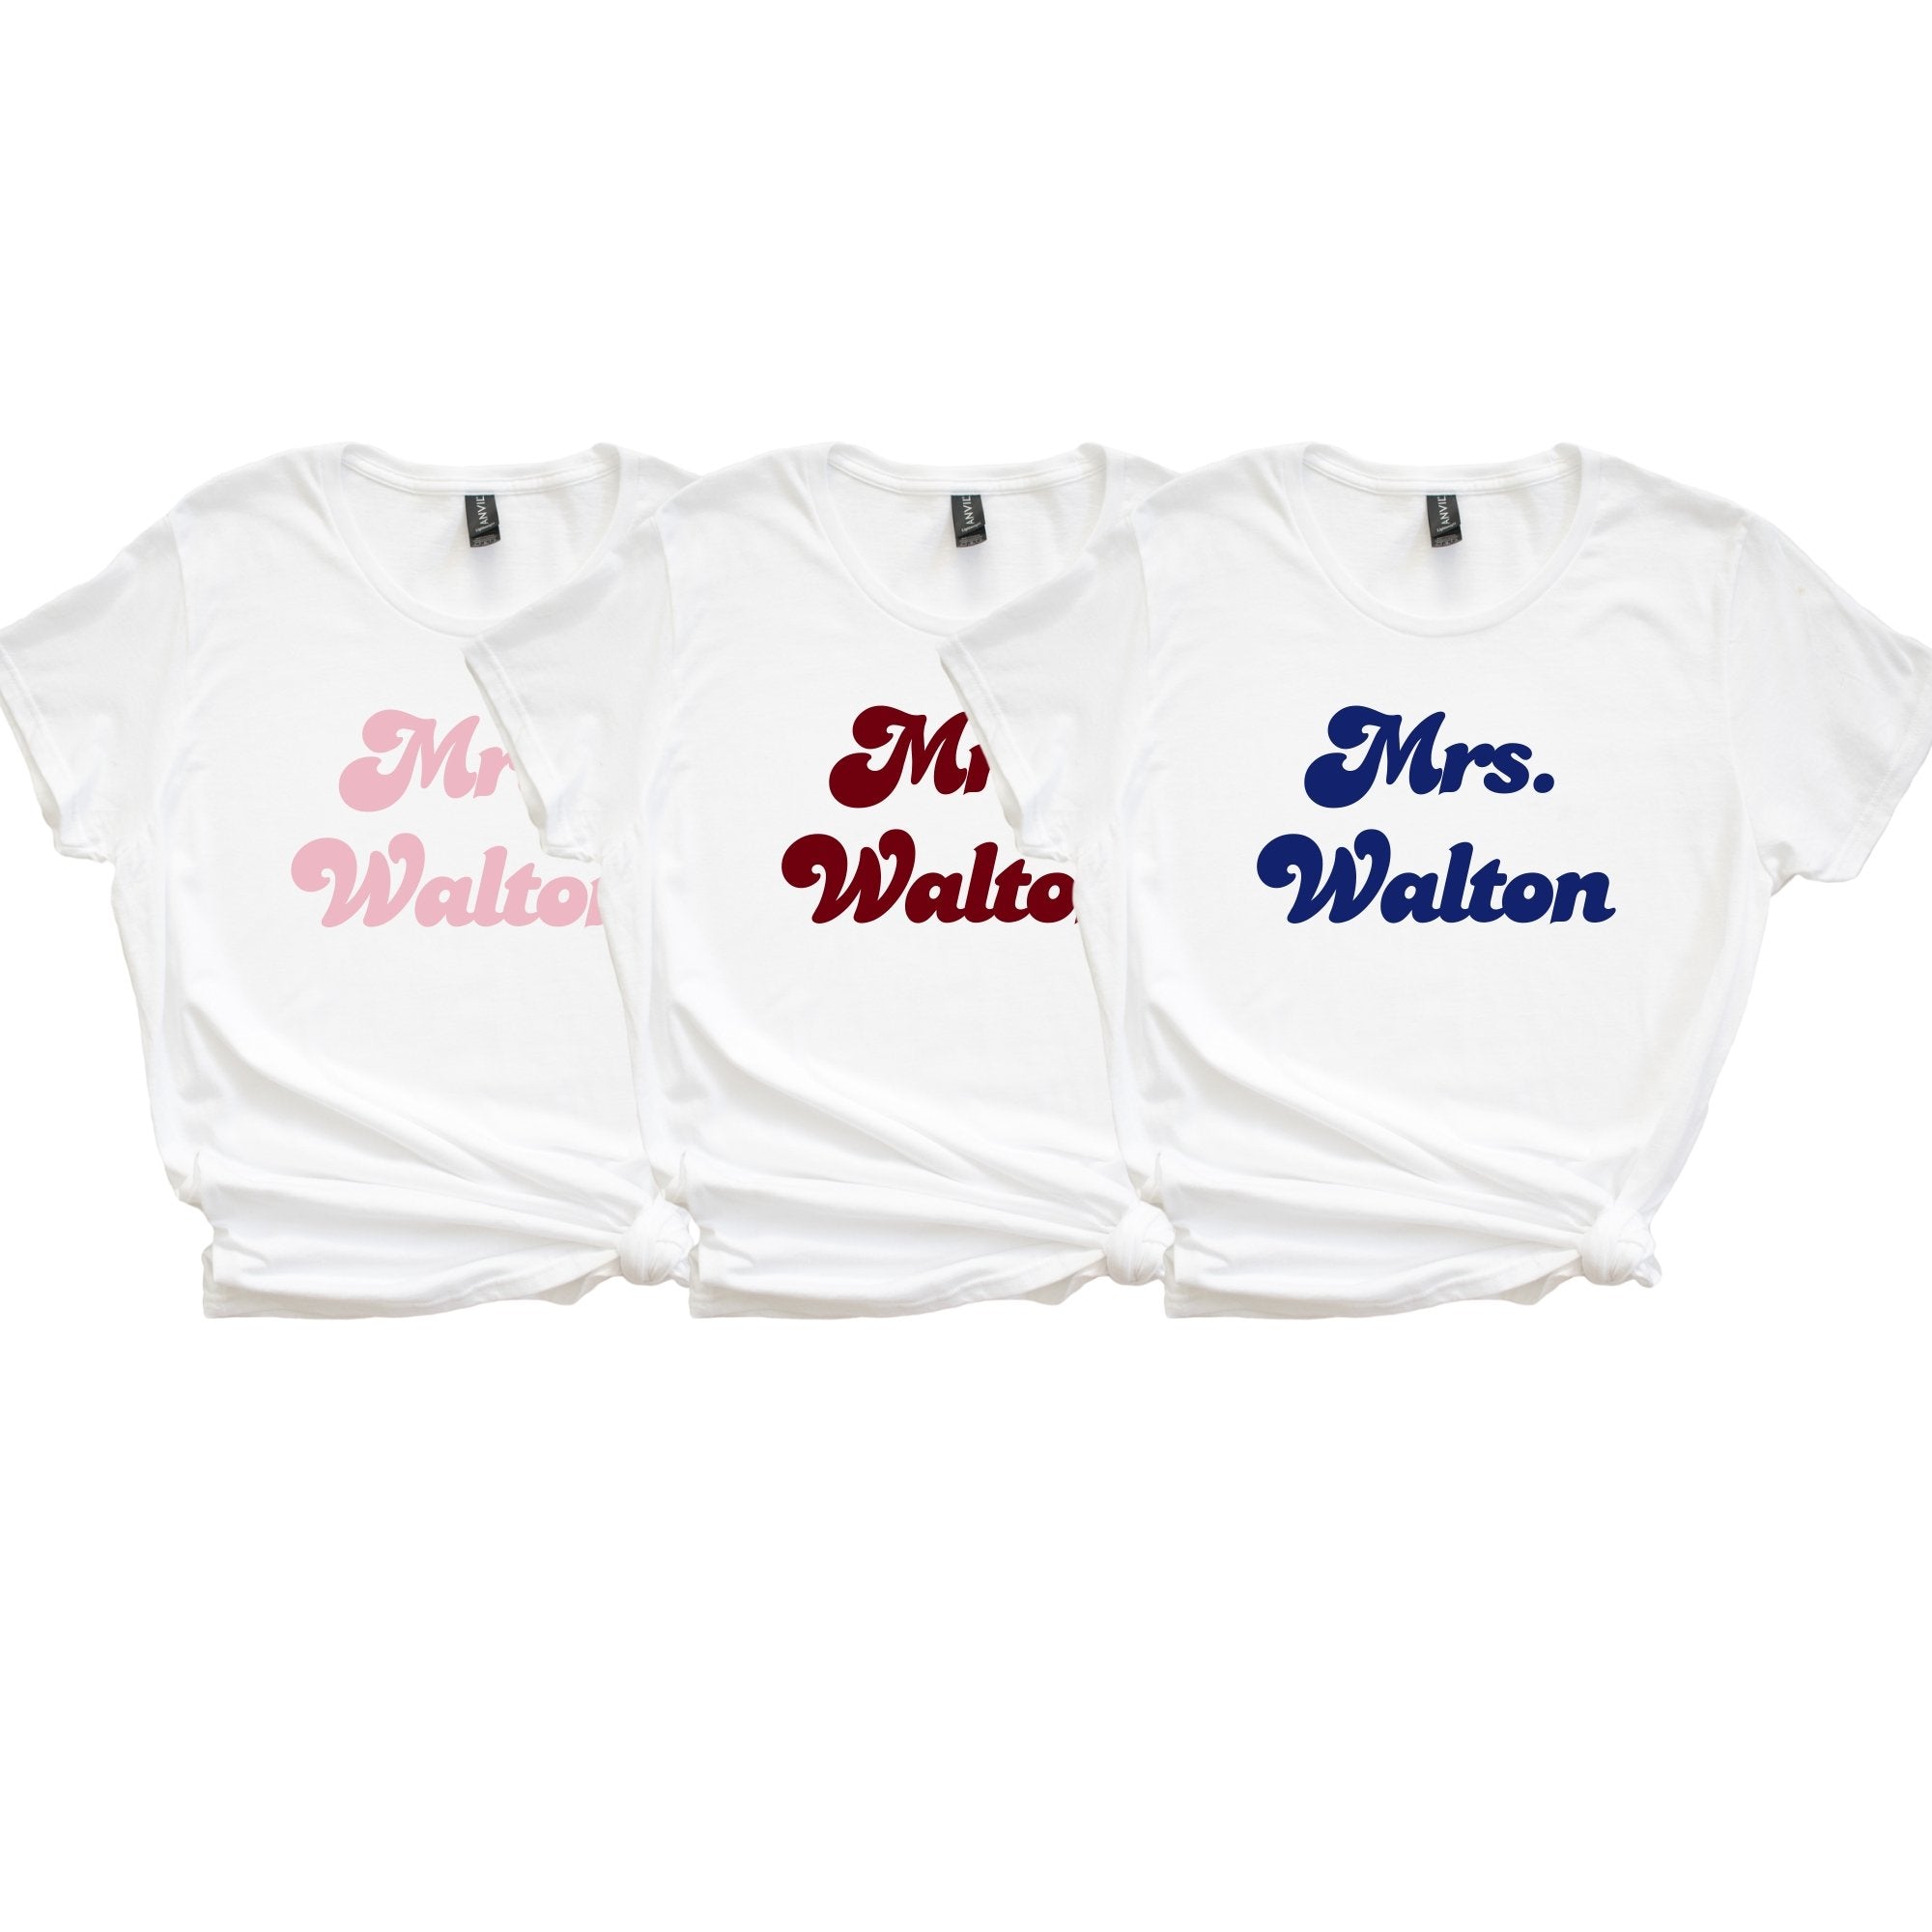 A white shirt is customized with "Mrs. Walton" in pink.